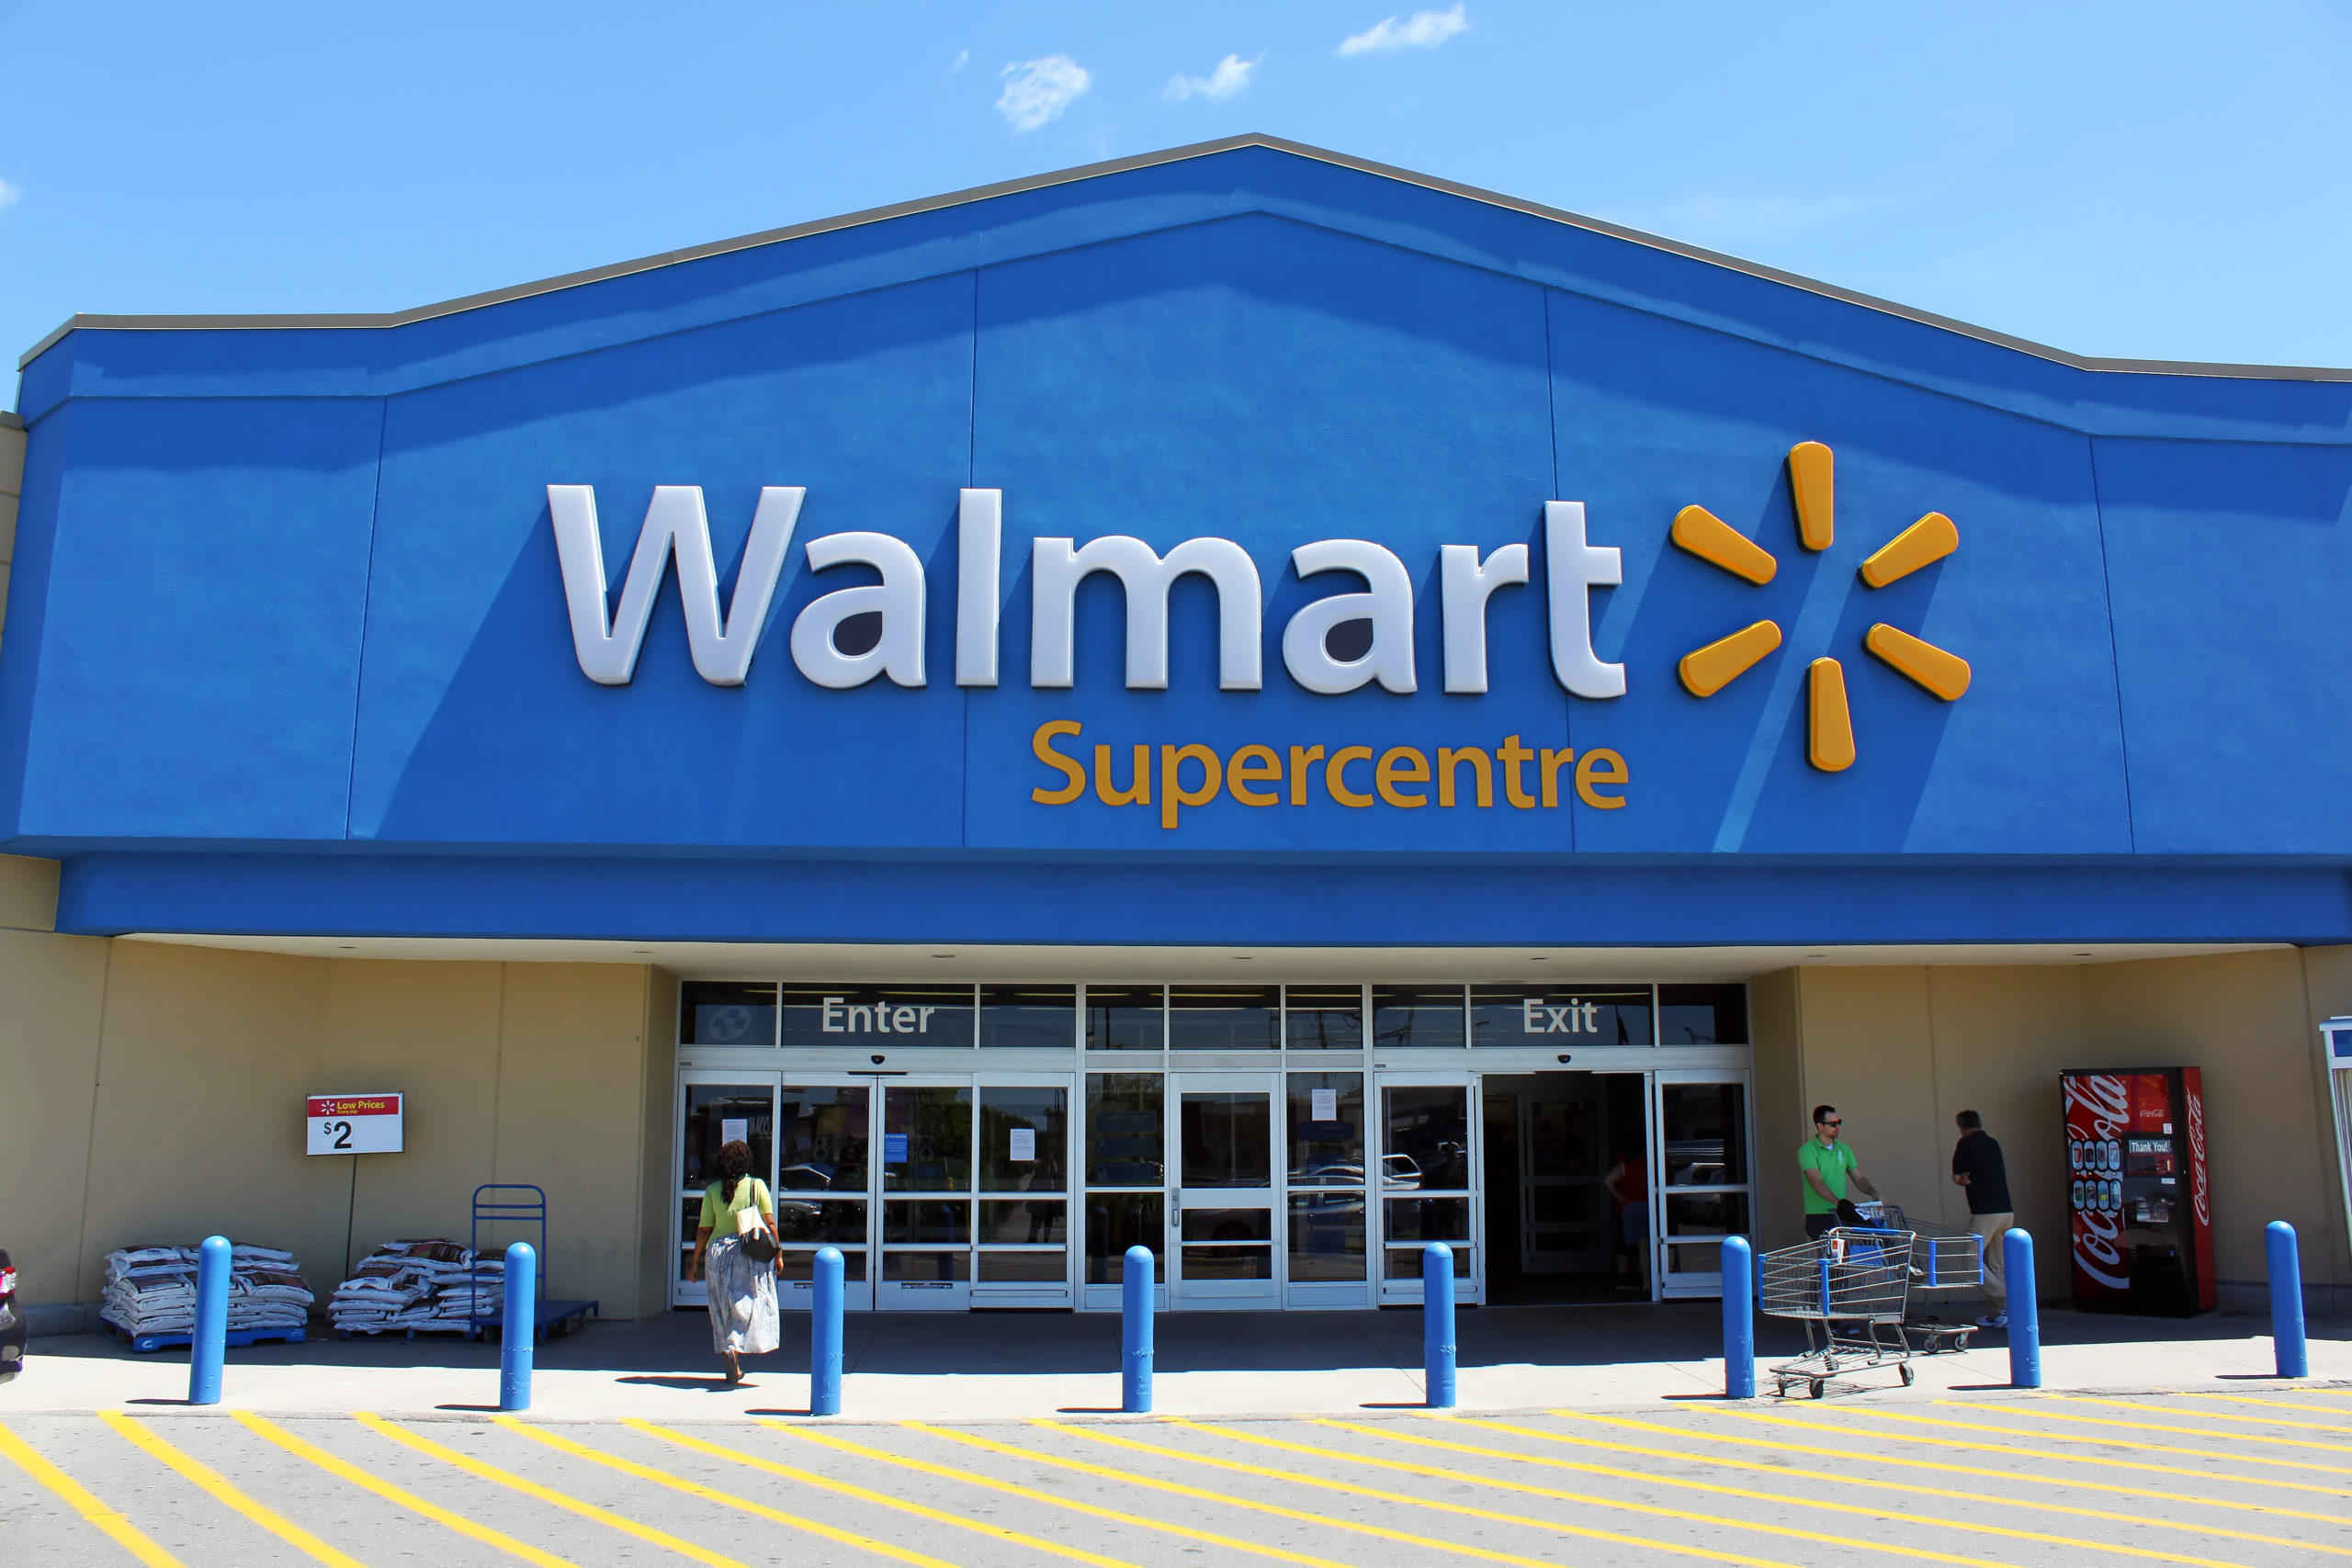 Discover 'bettergoods': Walmart's New Venture into Gourmet Affordable Foods